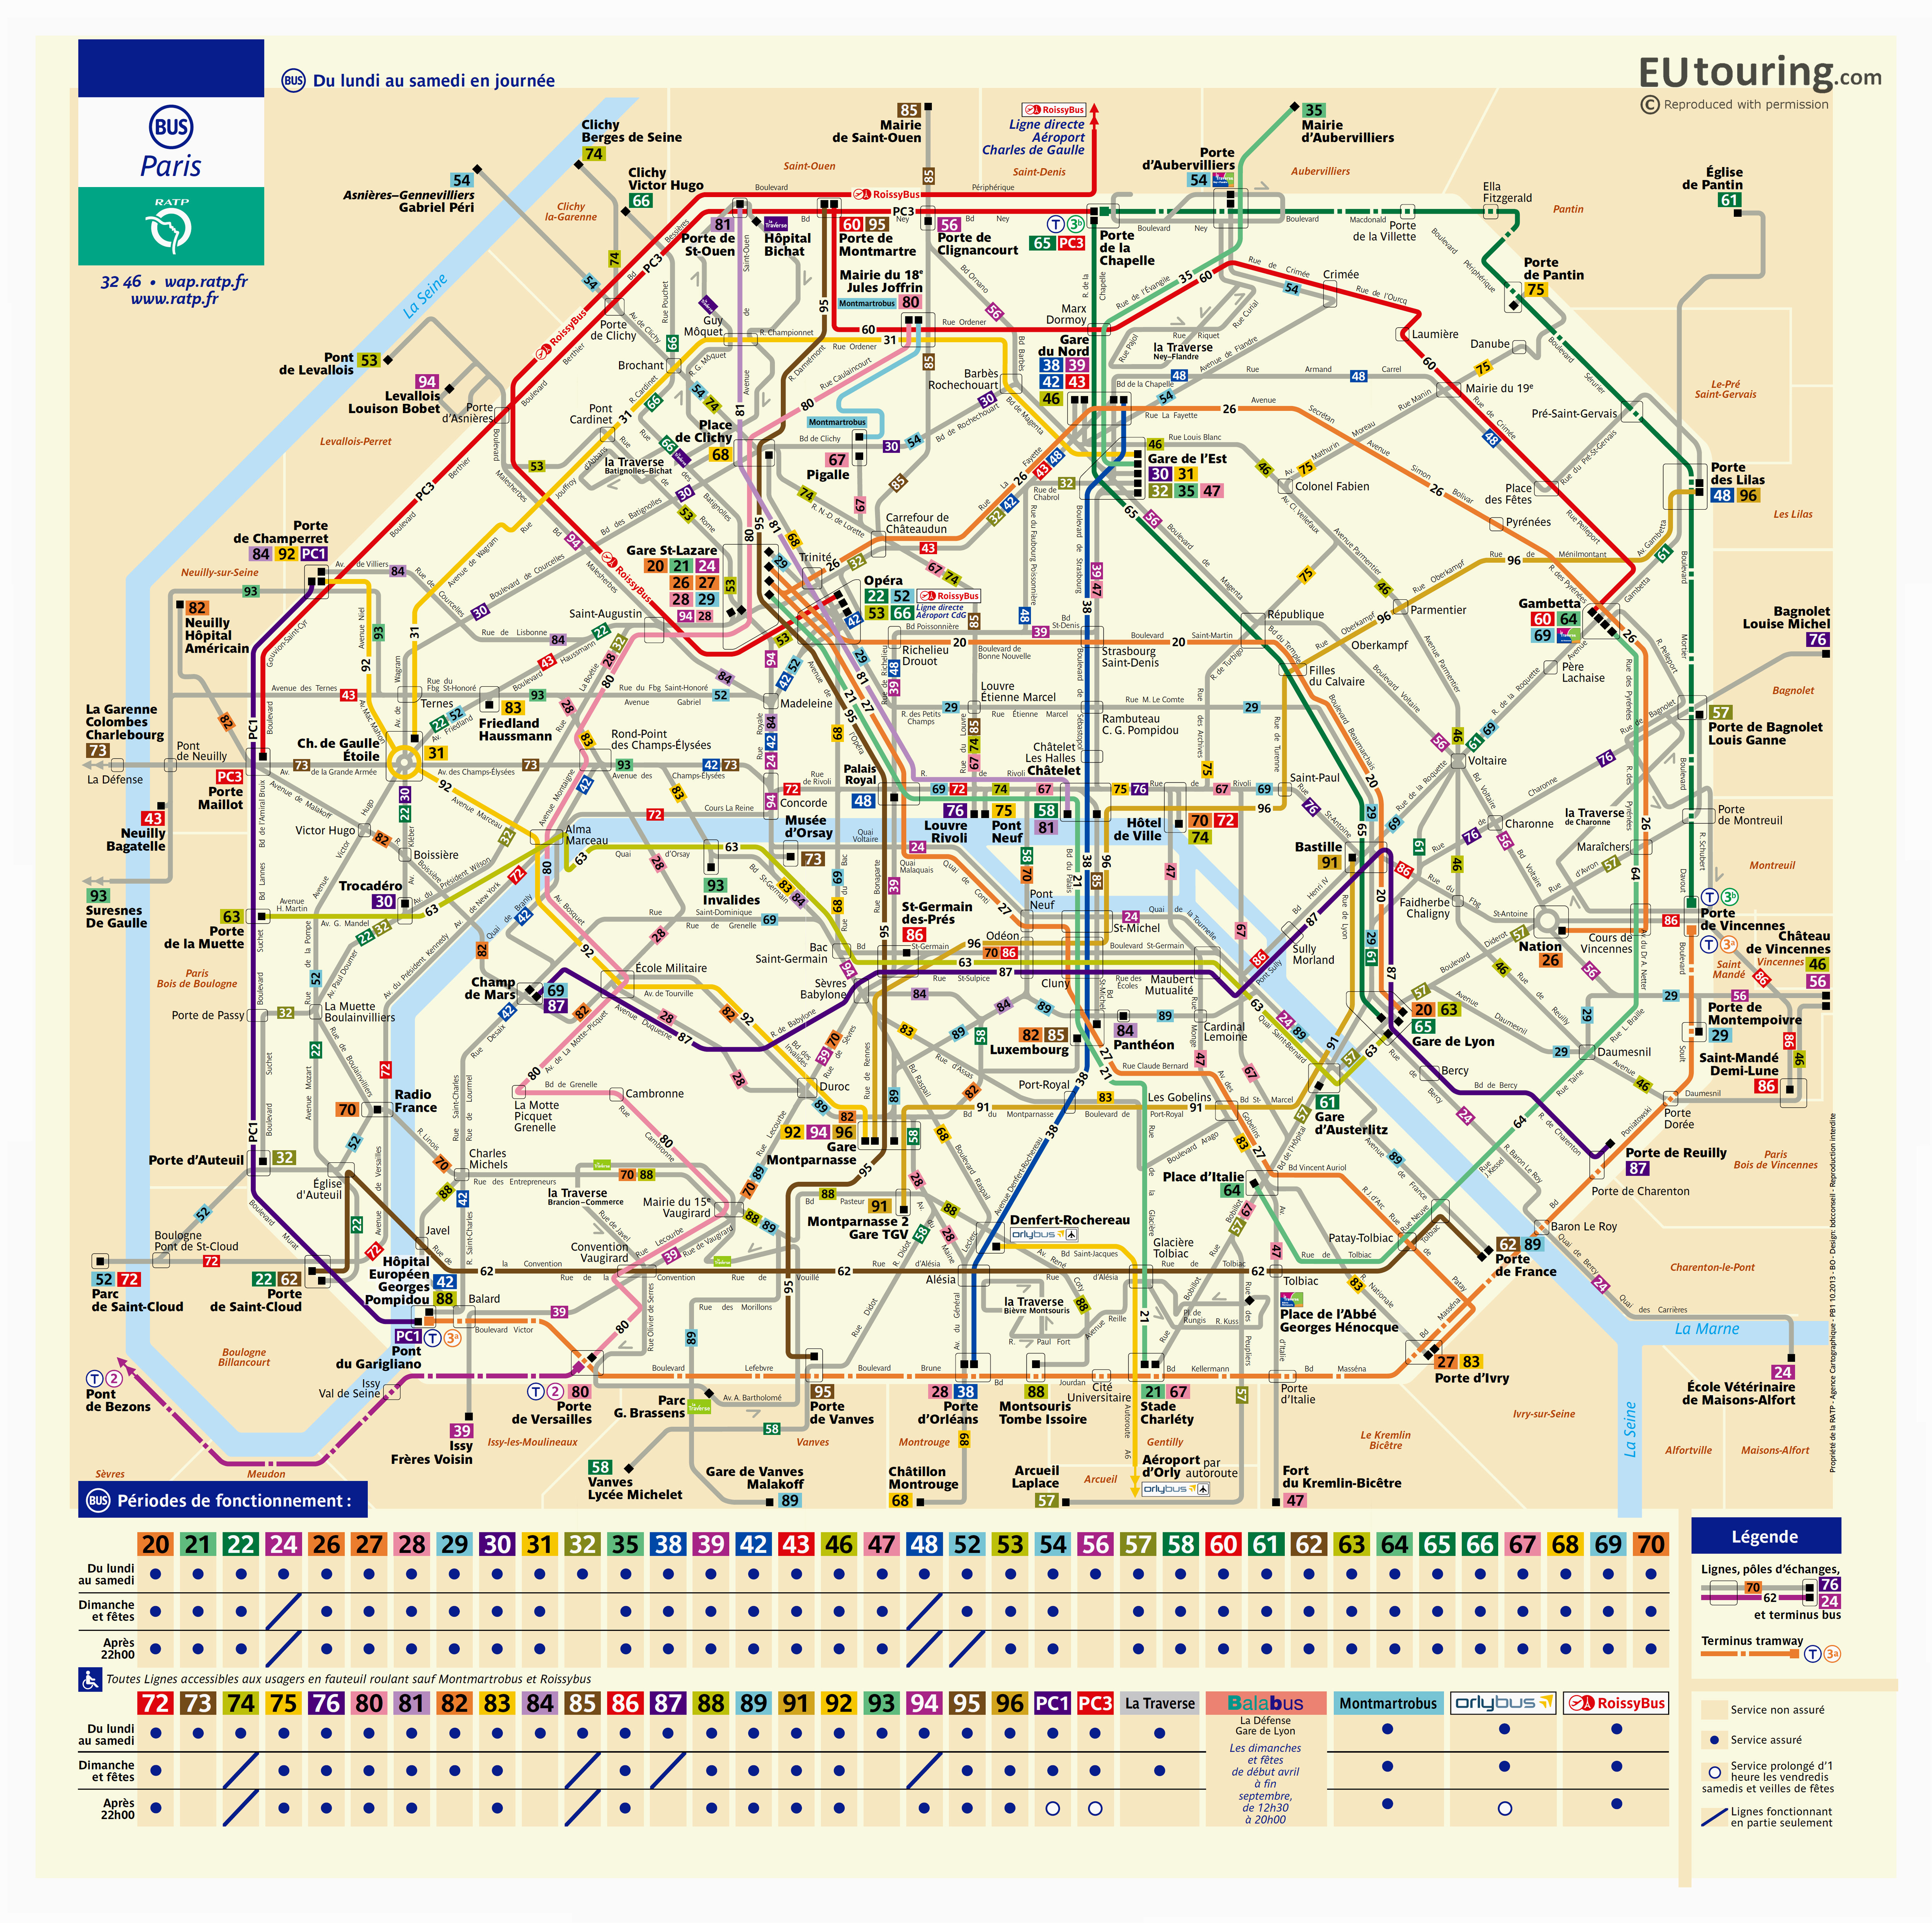 Paris Bus Route Maps With City Street Plan In Pdf Or Image File - Printable Route Maps